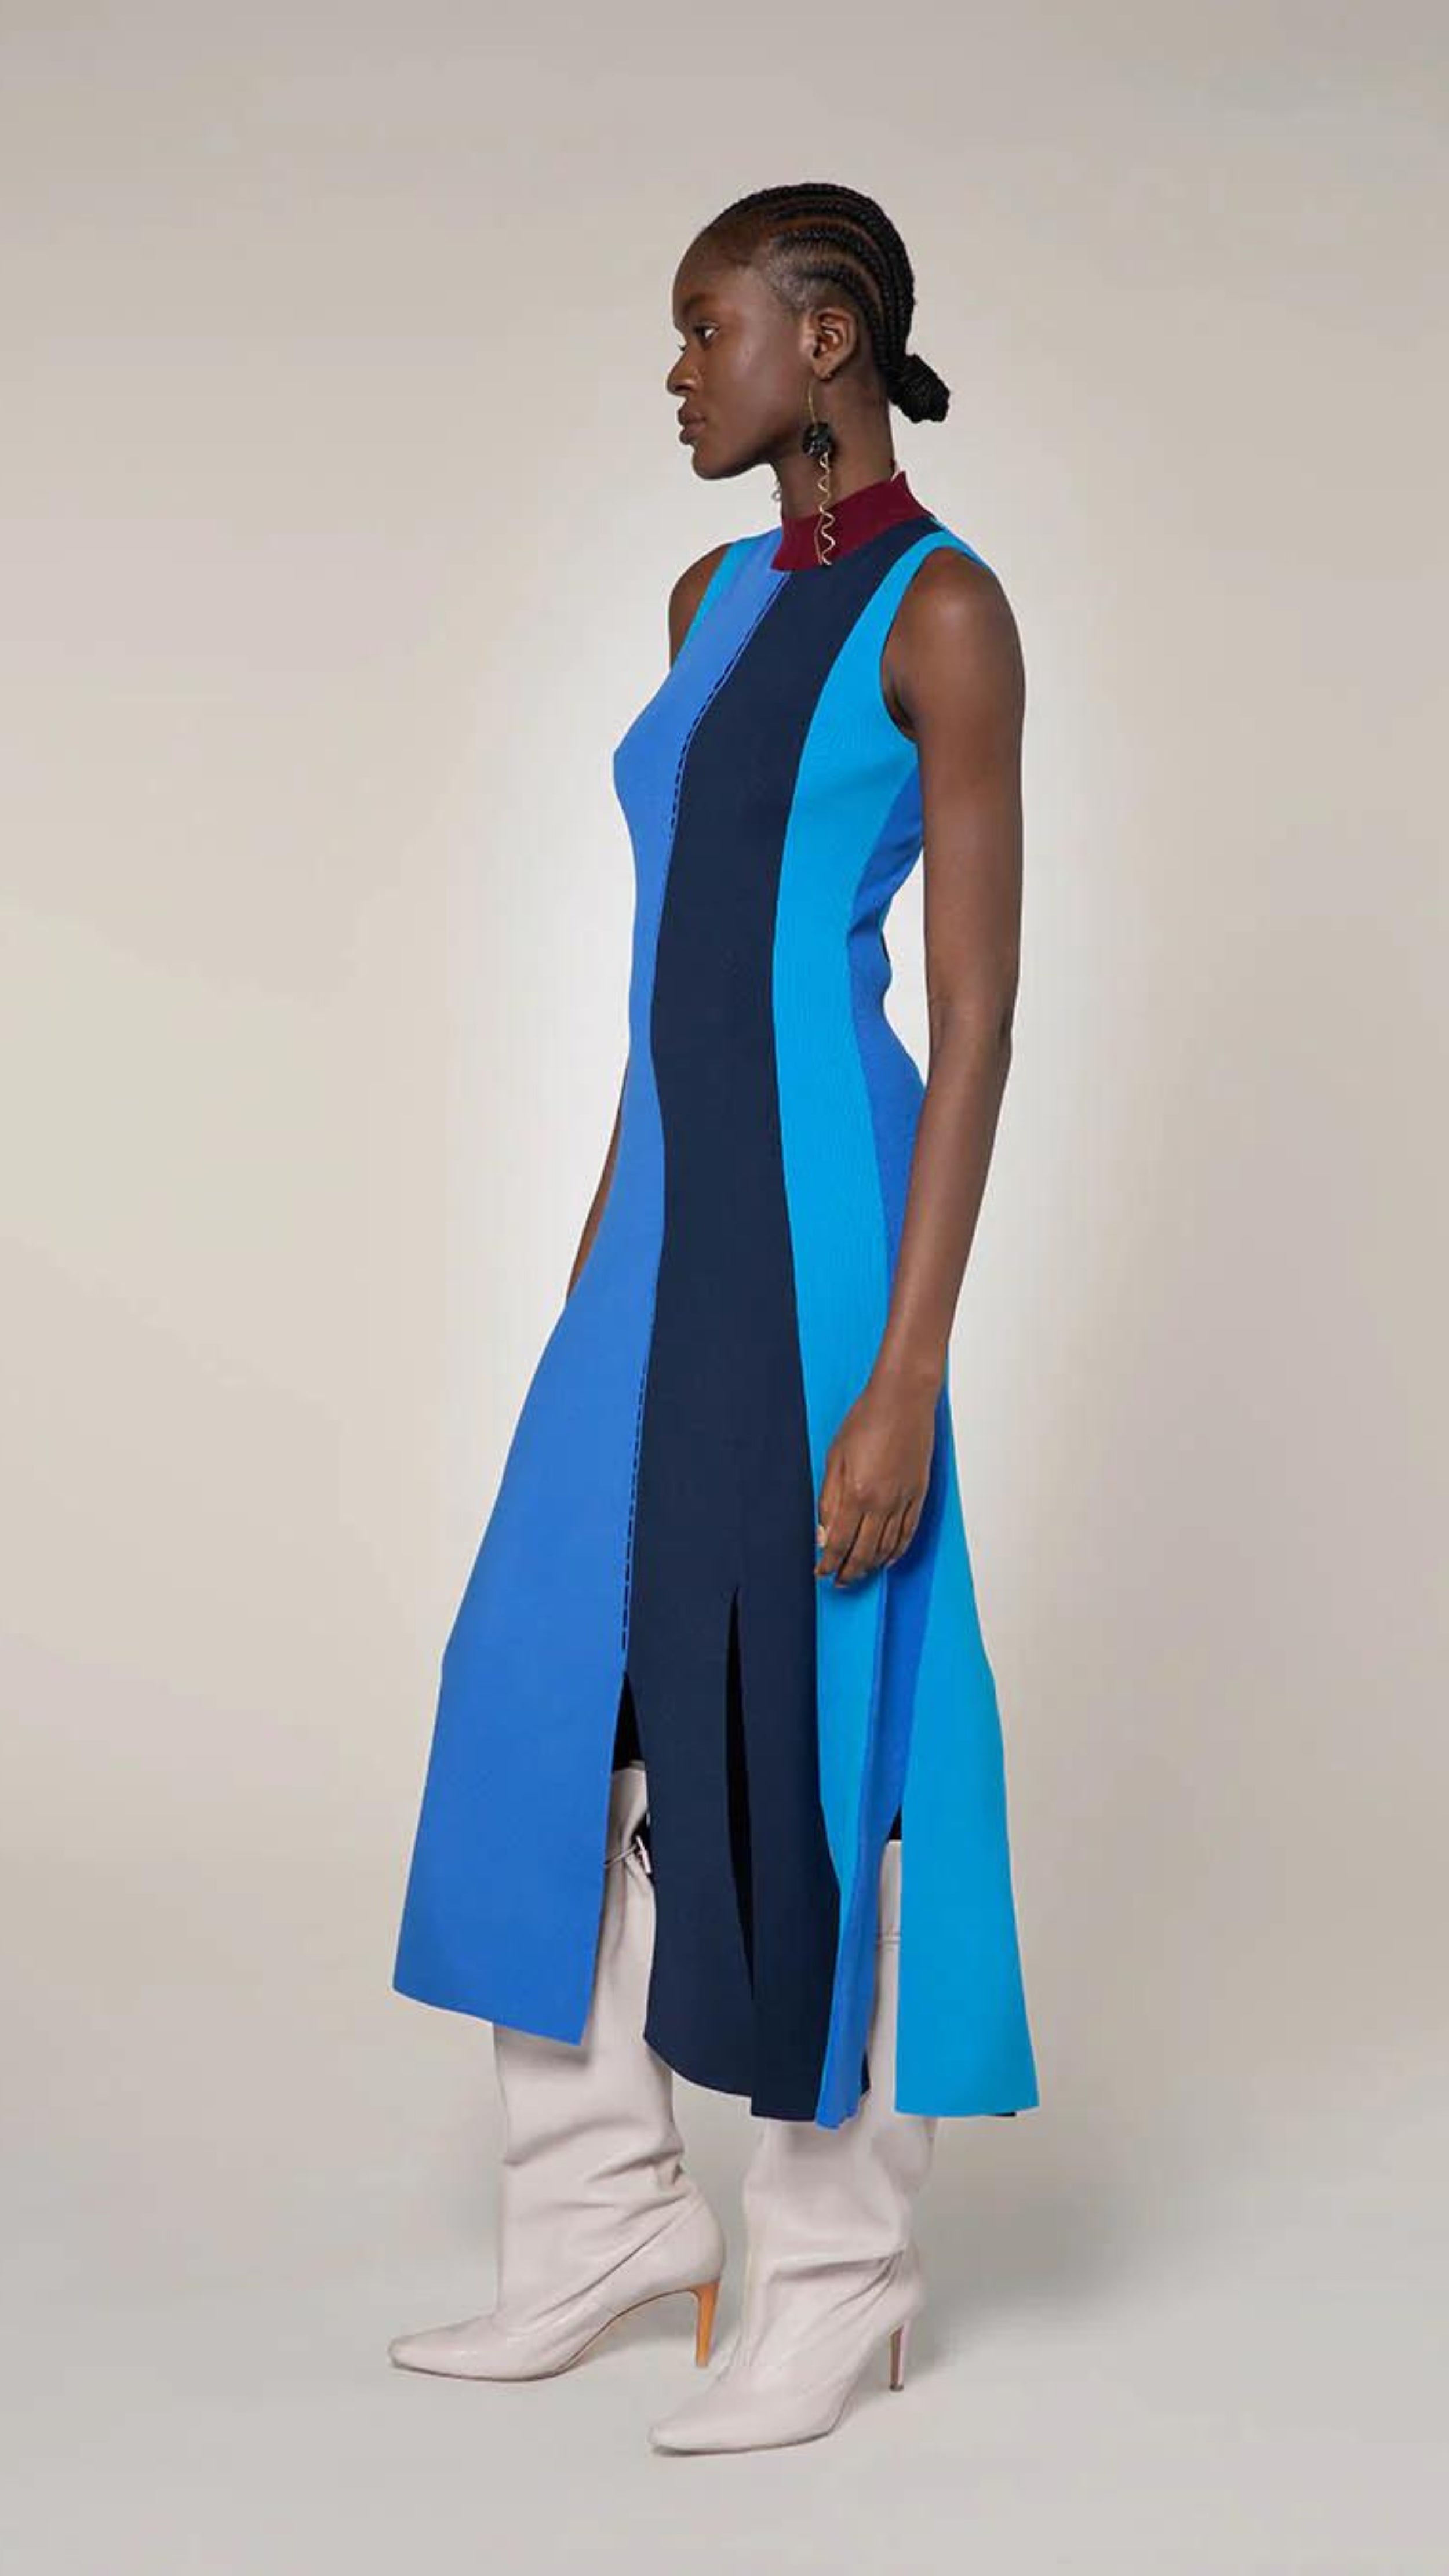 Roksanda Matthiola Knit Dress. Lightweight knit dress in varying blue tone vertical panels. With wide fringe bottom it falls to a midi dress length. A contrasting burgundy color. Shown on model facing side.